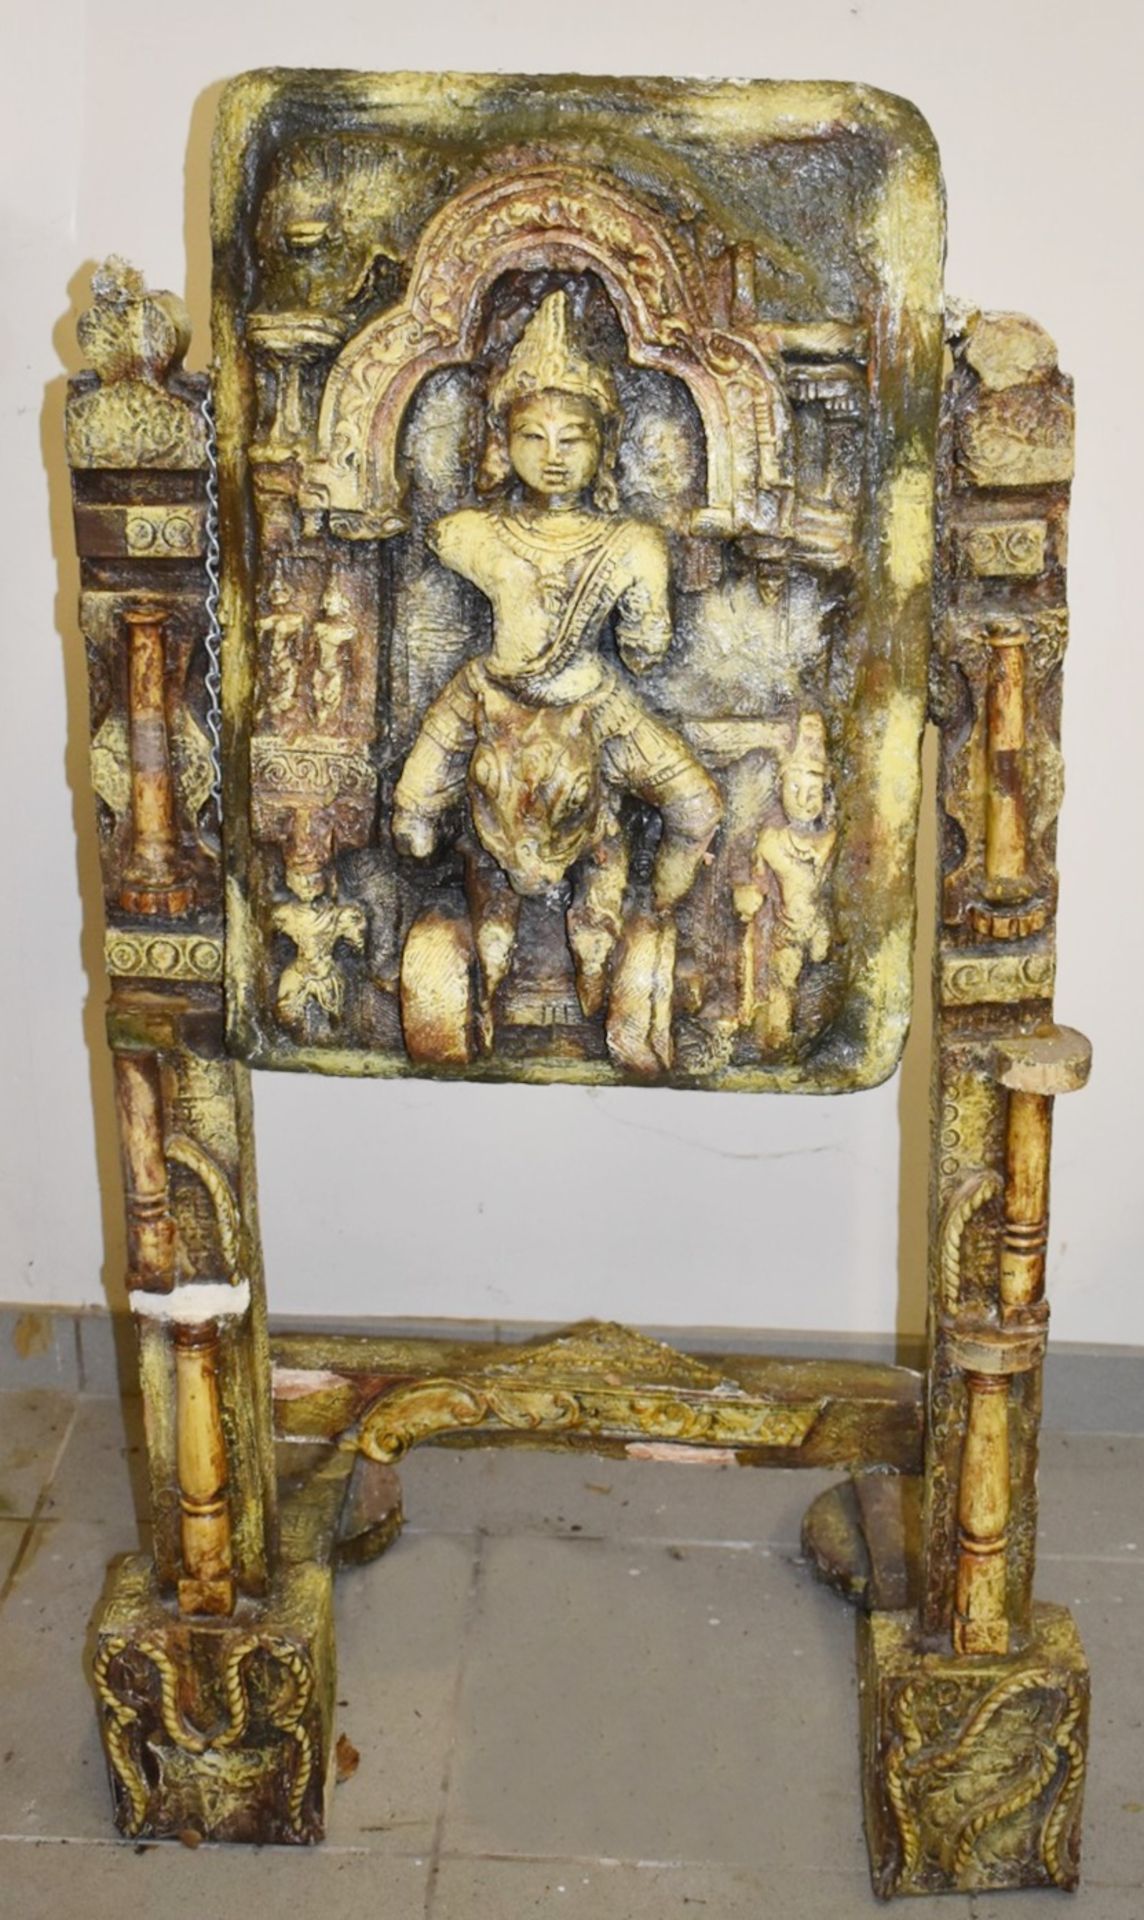 1 x Vintage Hindu Religious Freestanding Plaque - Stunning Ornate Piece - From an Exclusive Hale